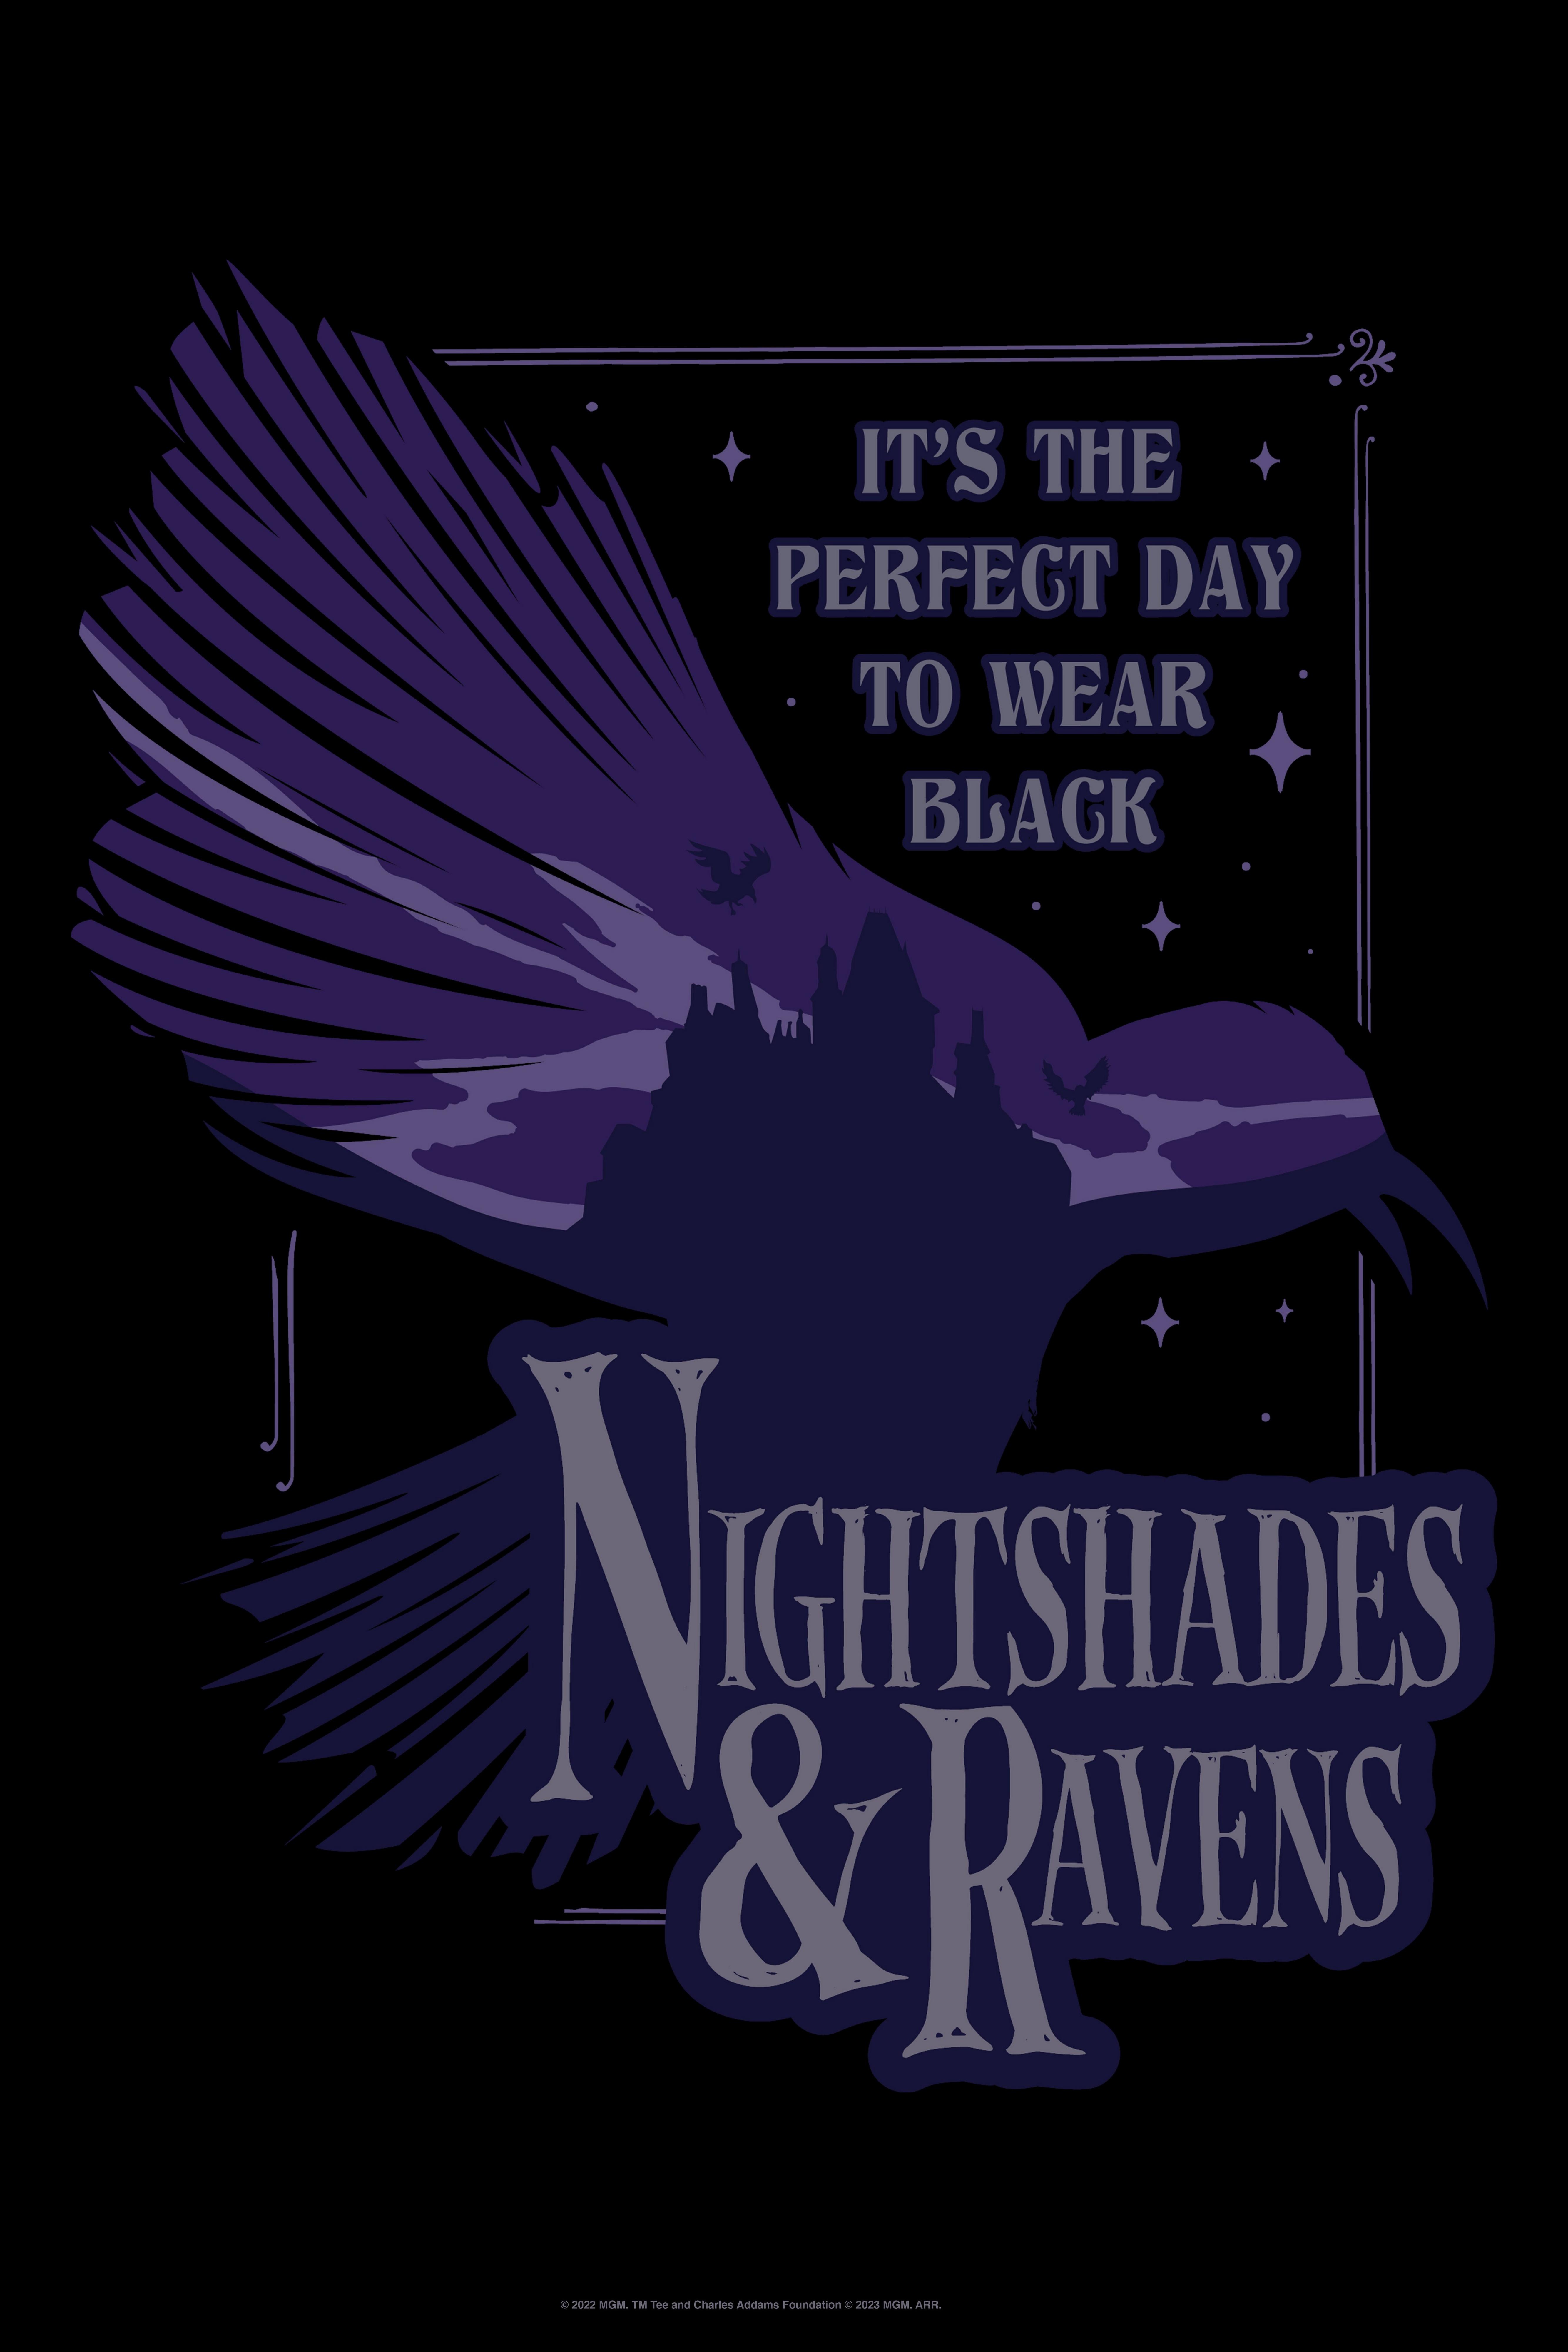 Wednesday Nightshades And Ravens Poster